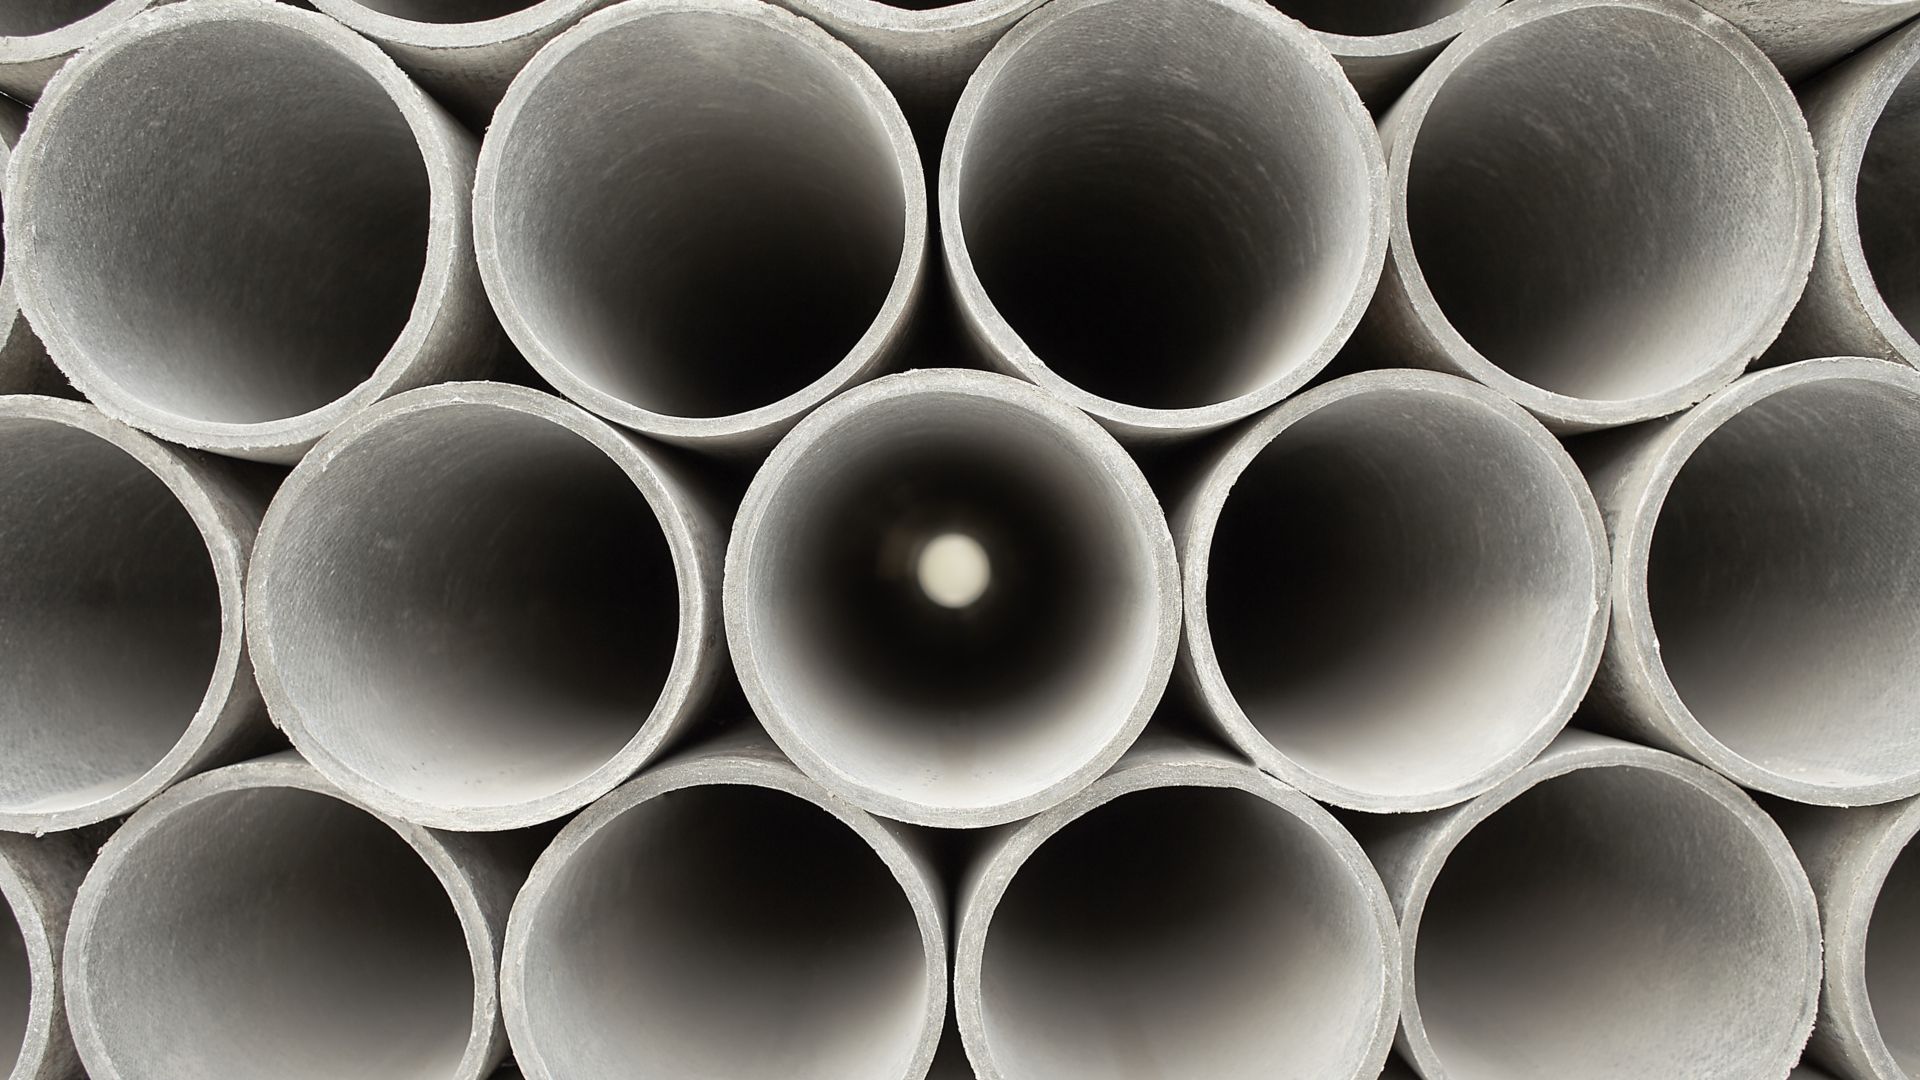 Pipes at the hardware store used for the construction. Close up concrete, cement pipes stacking, pattern background. Asbestos pipes for irrigation.